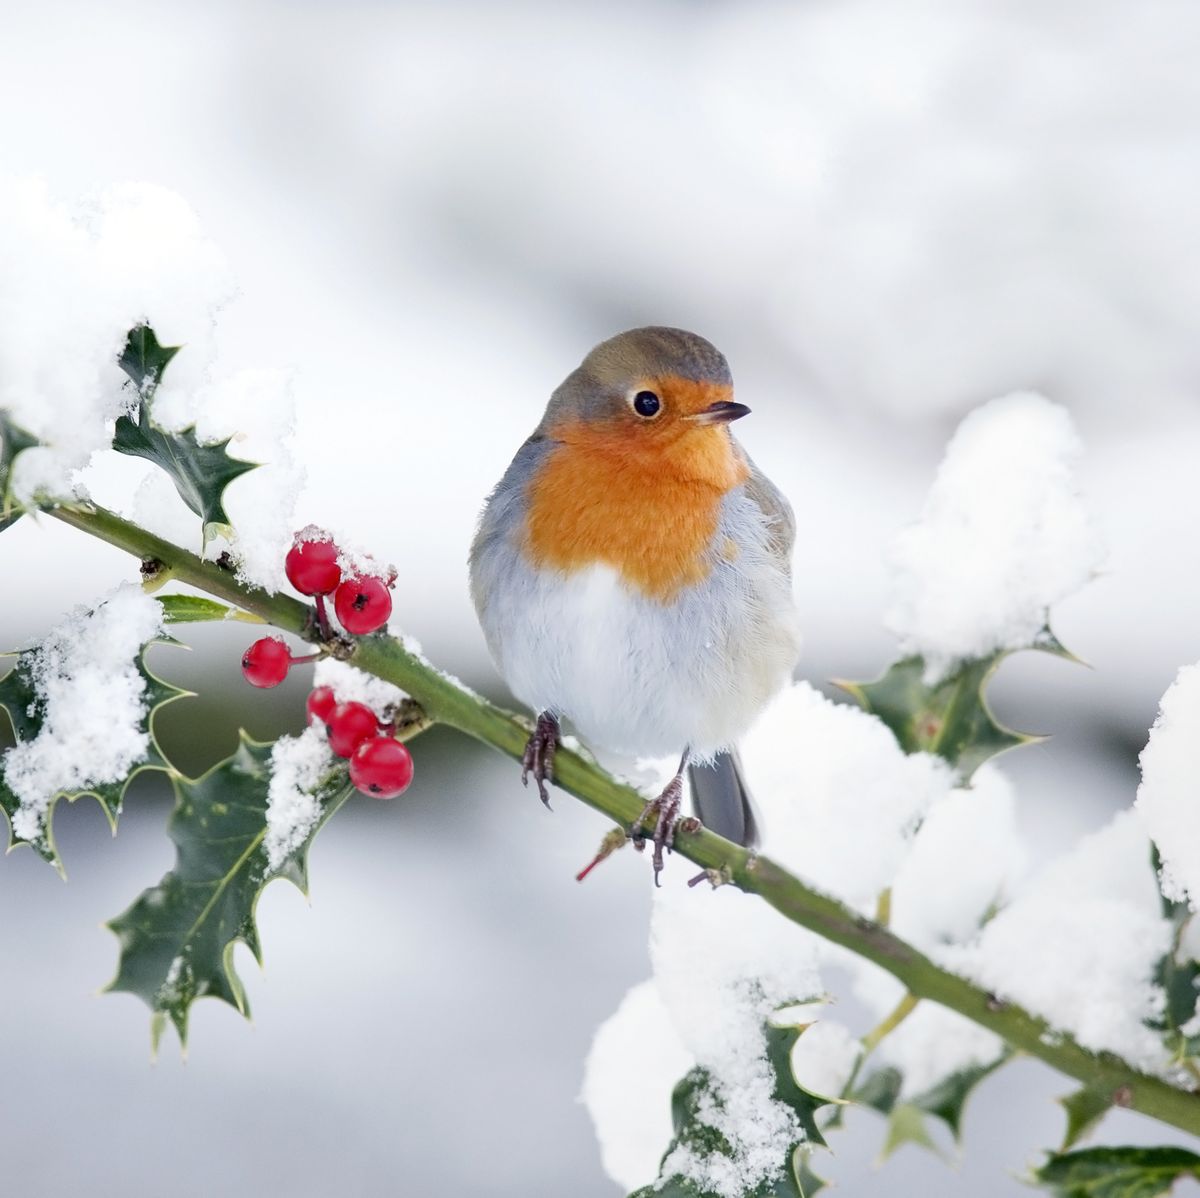 how to help robins survive the harsh winter weather